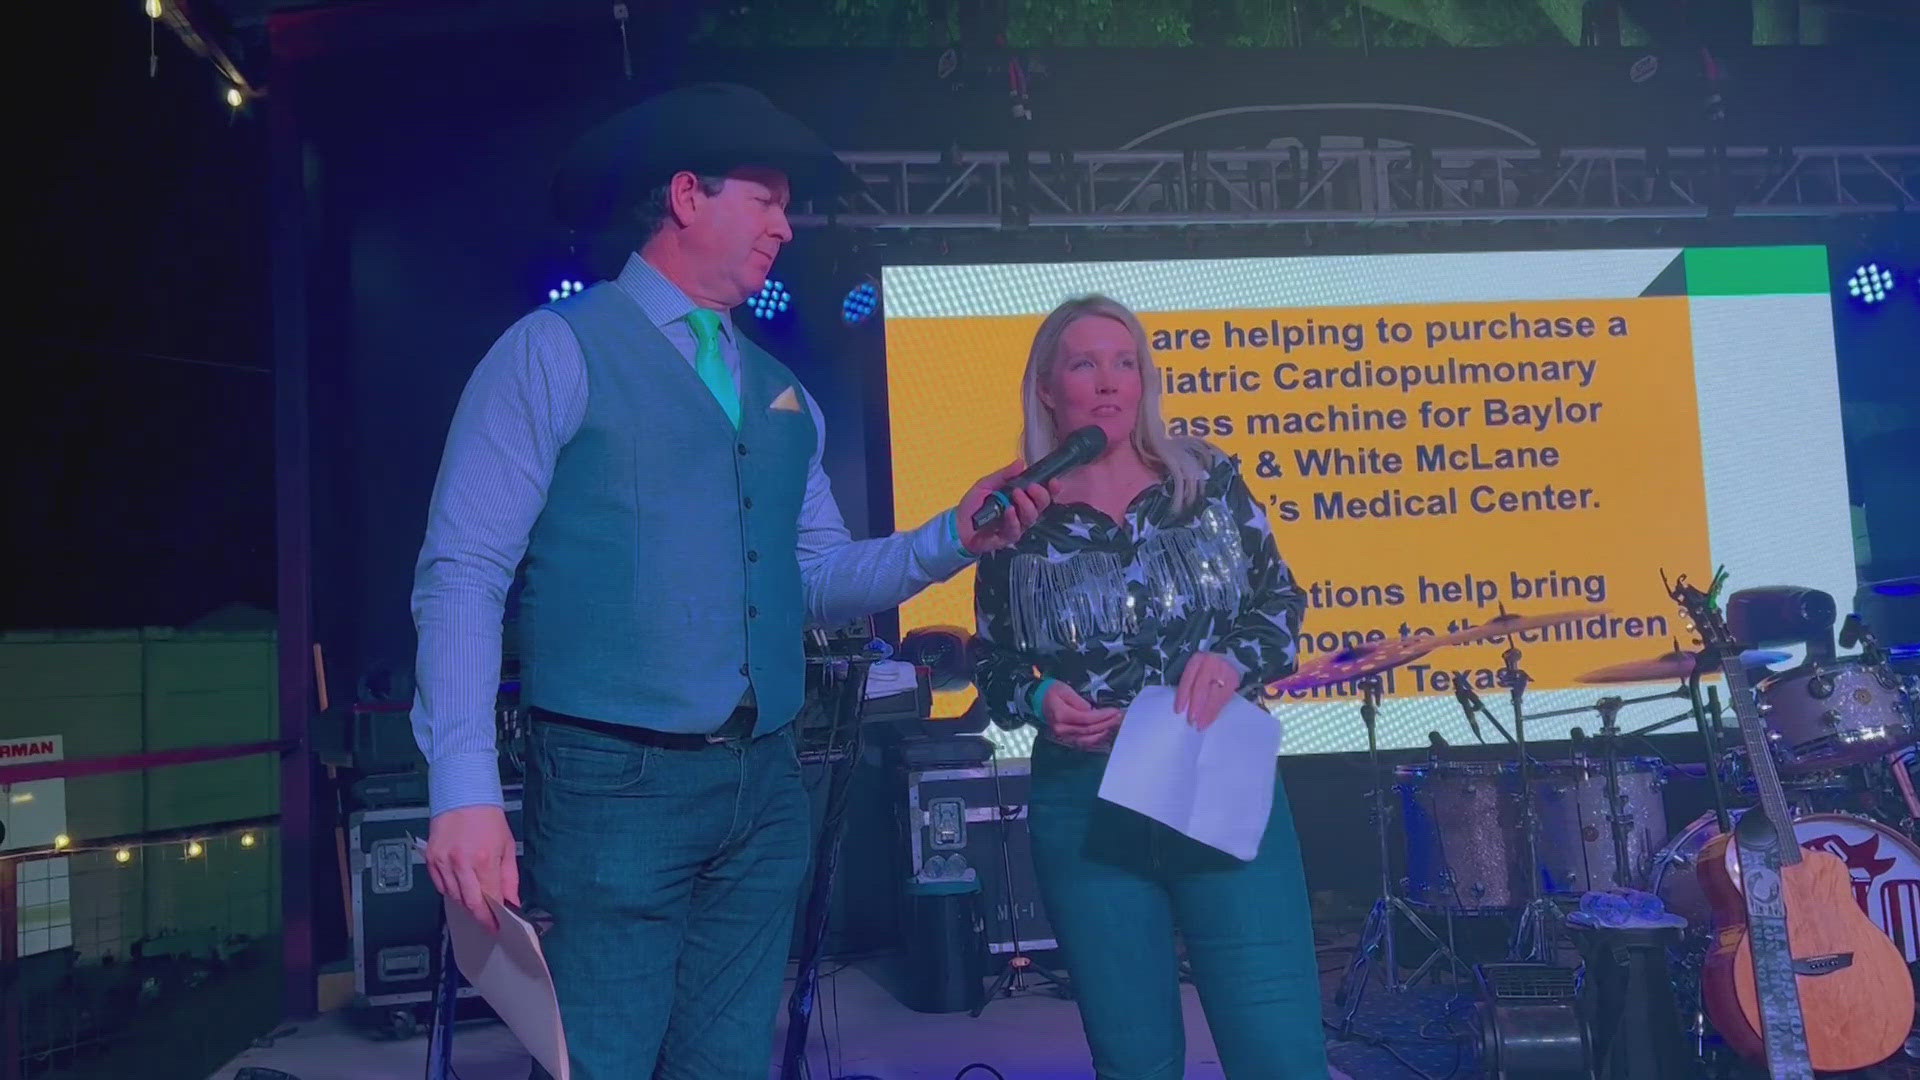 Proceeds from the fundraising event will help fund the new pediatric cardiovascular surgery program at Baylor Scott & White McLane Children's Medical Center.